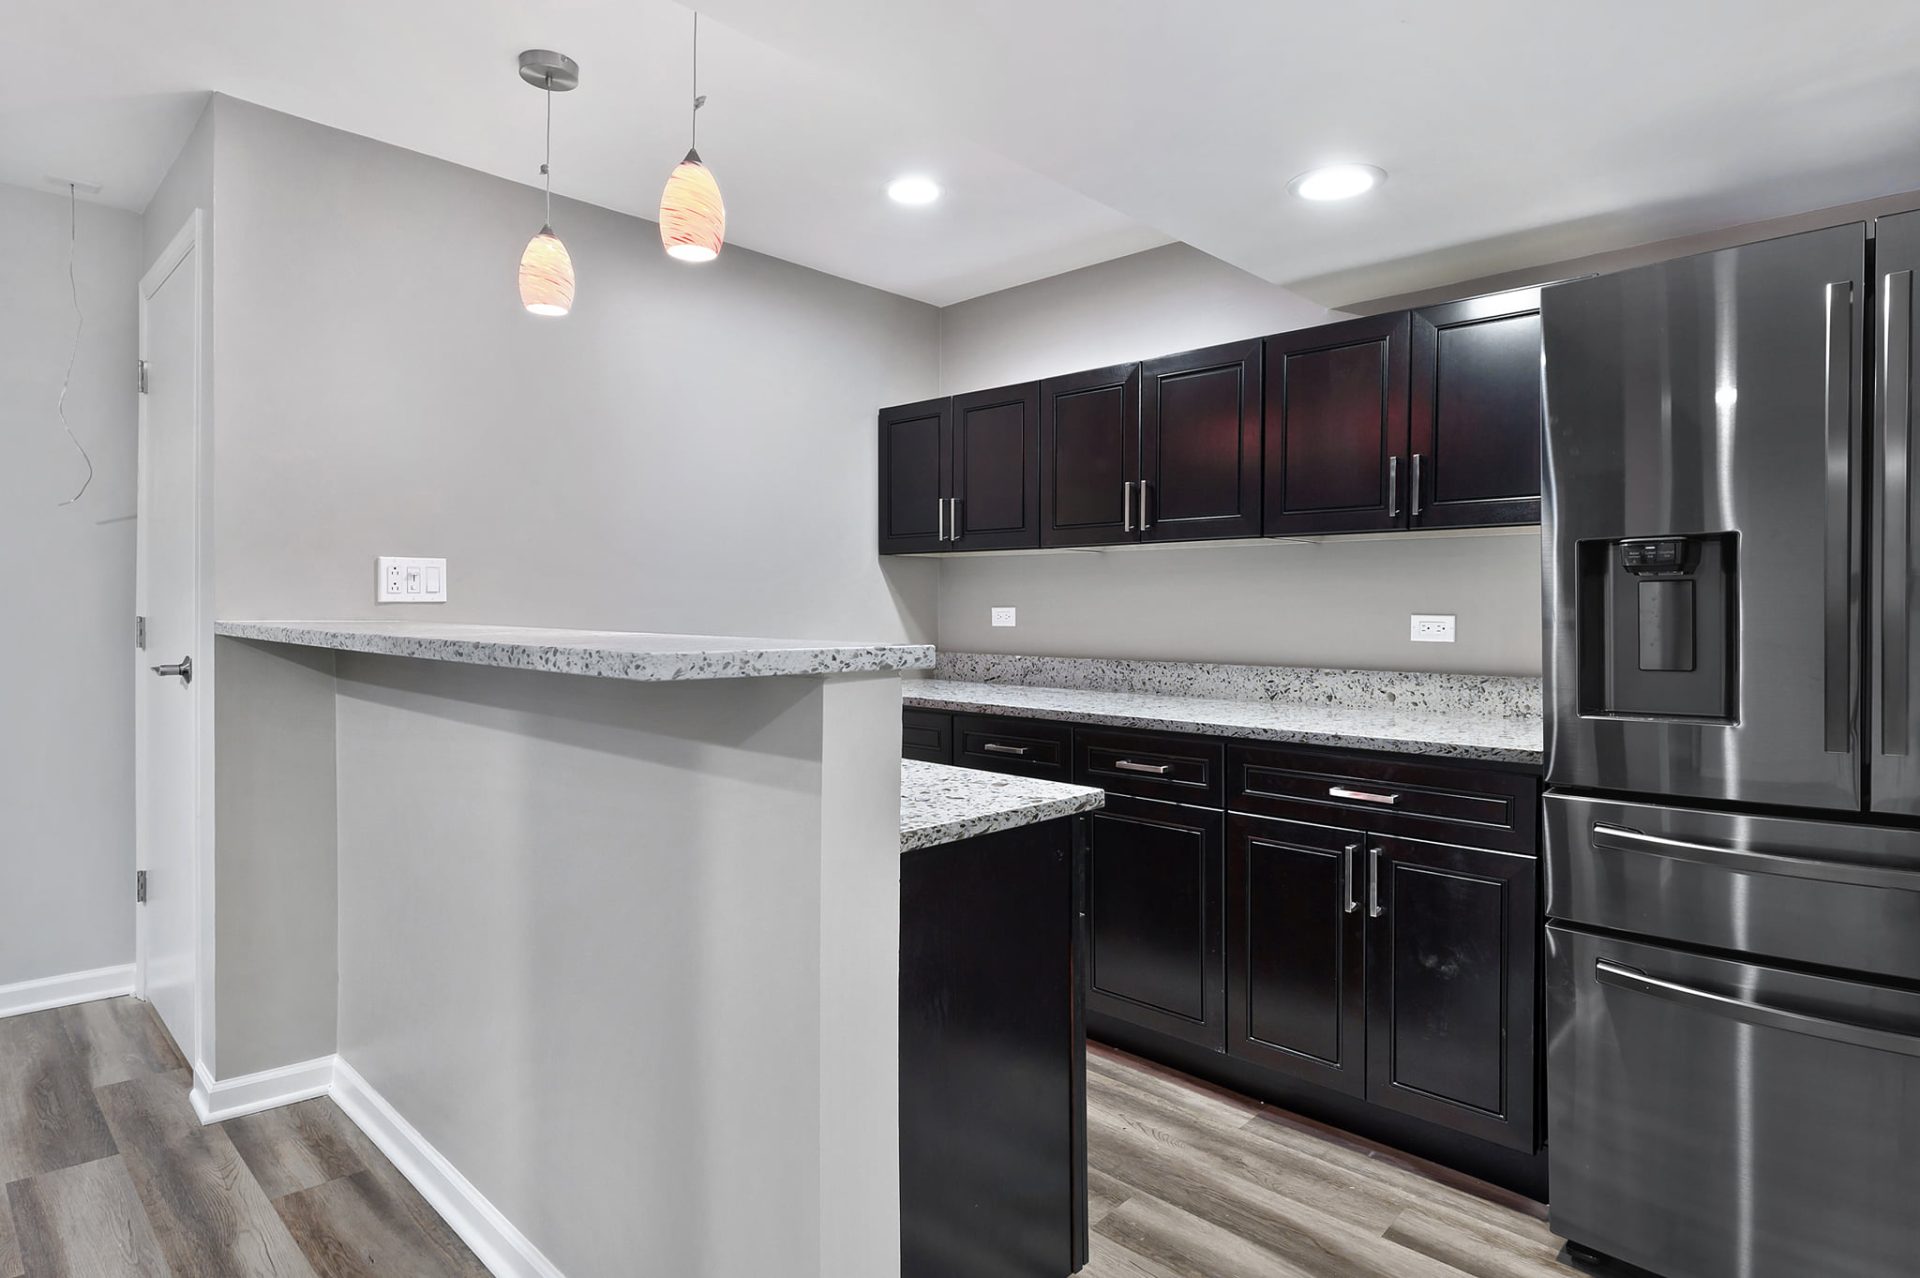 Full basement remodel with dry bar, LVT flooring, can lights, cabinets for dry bar, quartz countertop, stainless steel appliances, pendants for bar area, and chrome handles